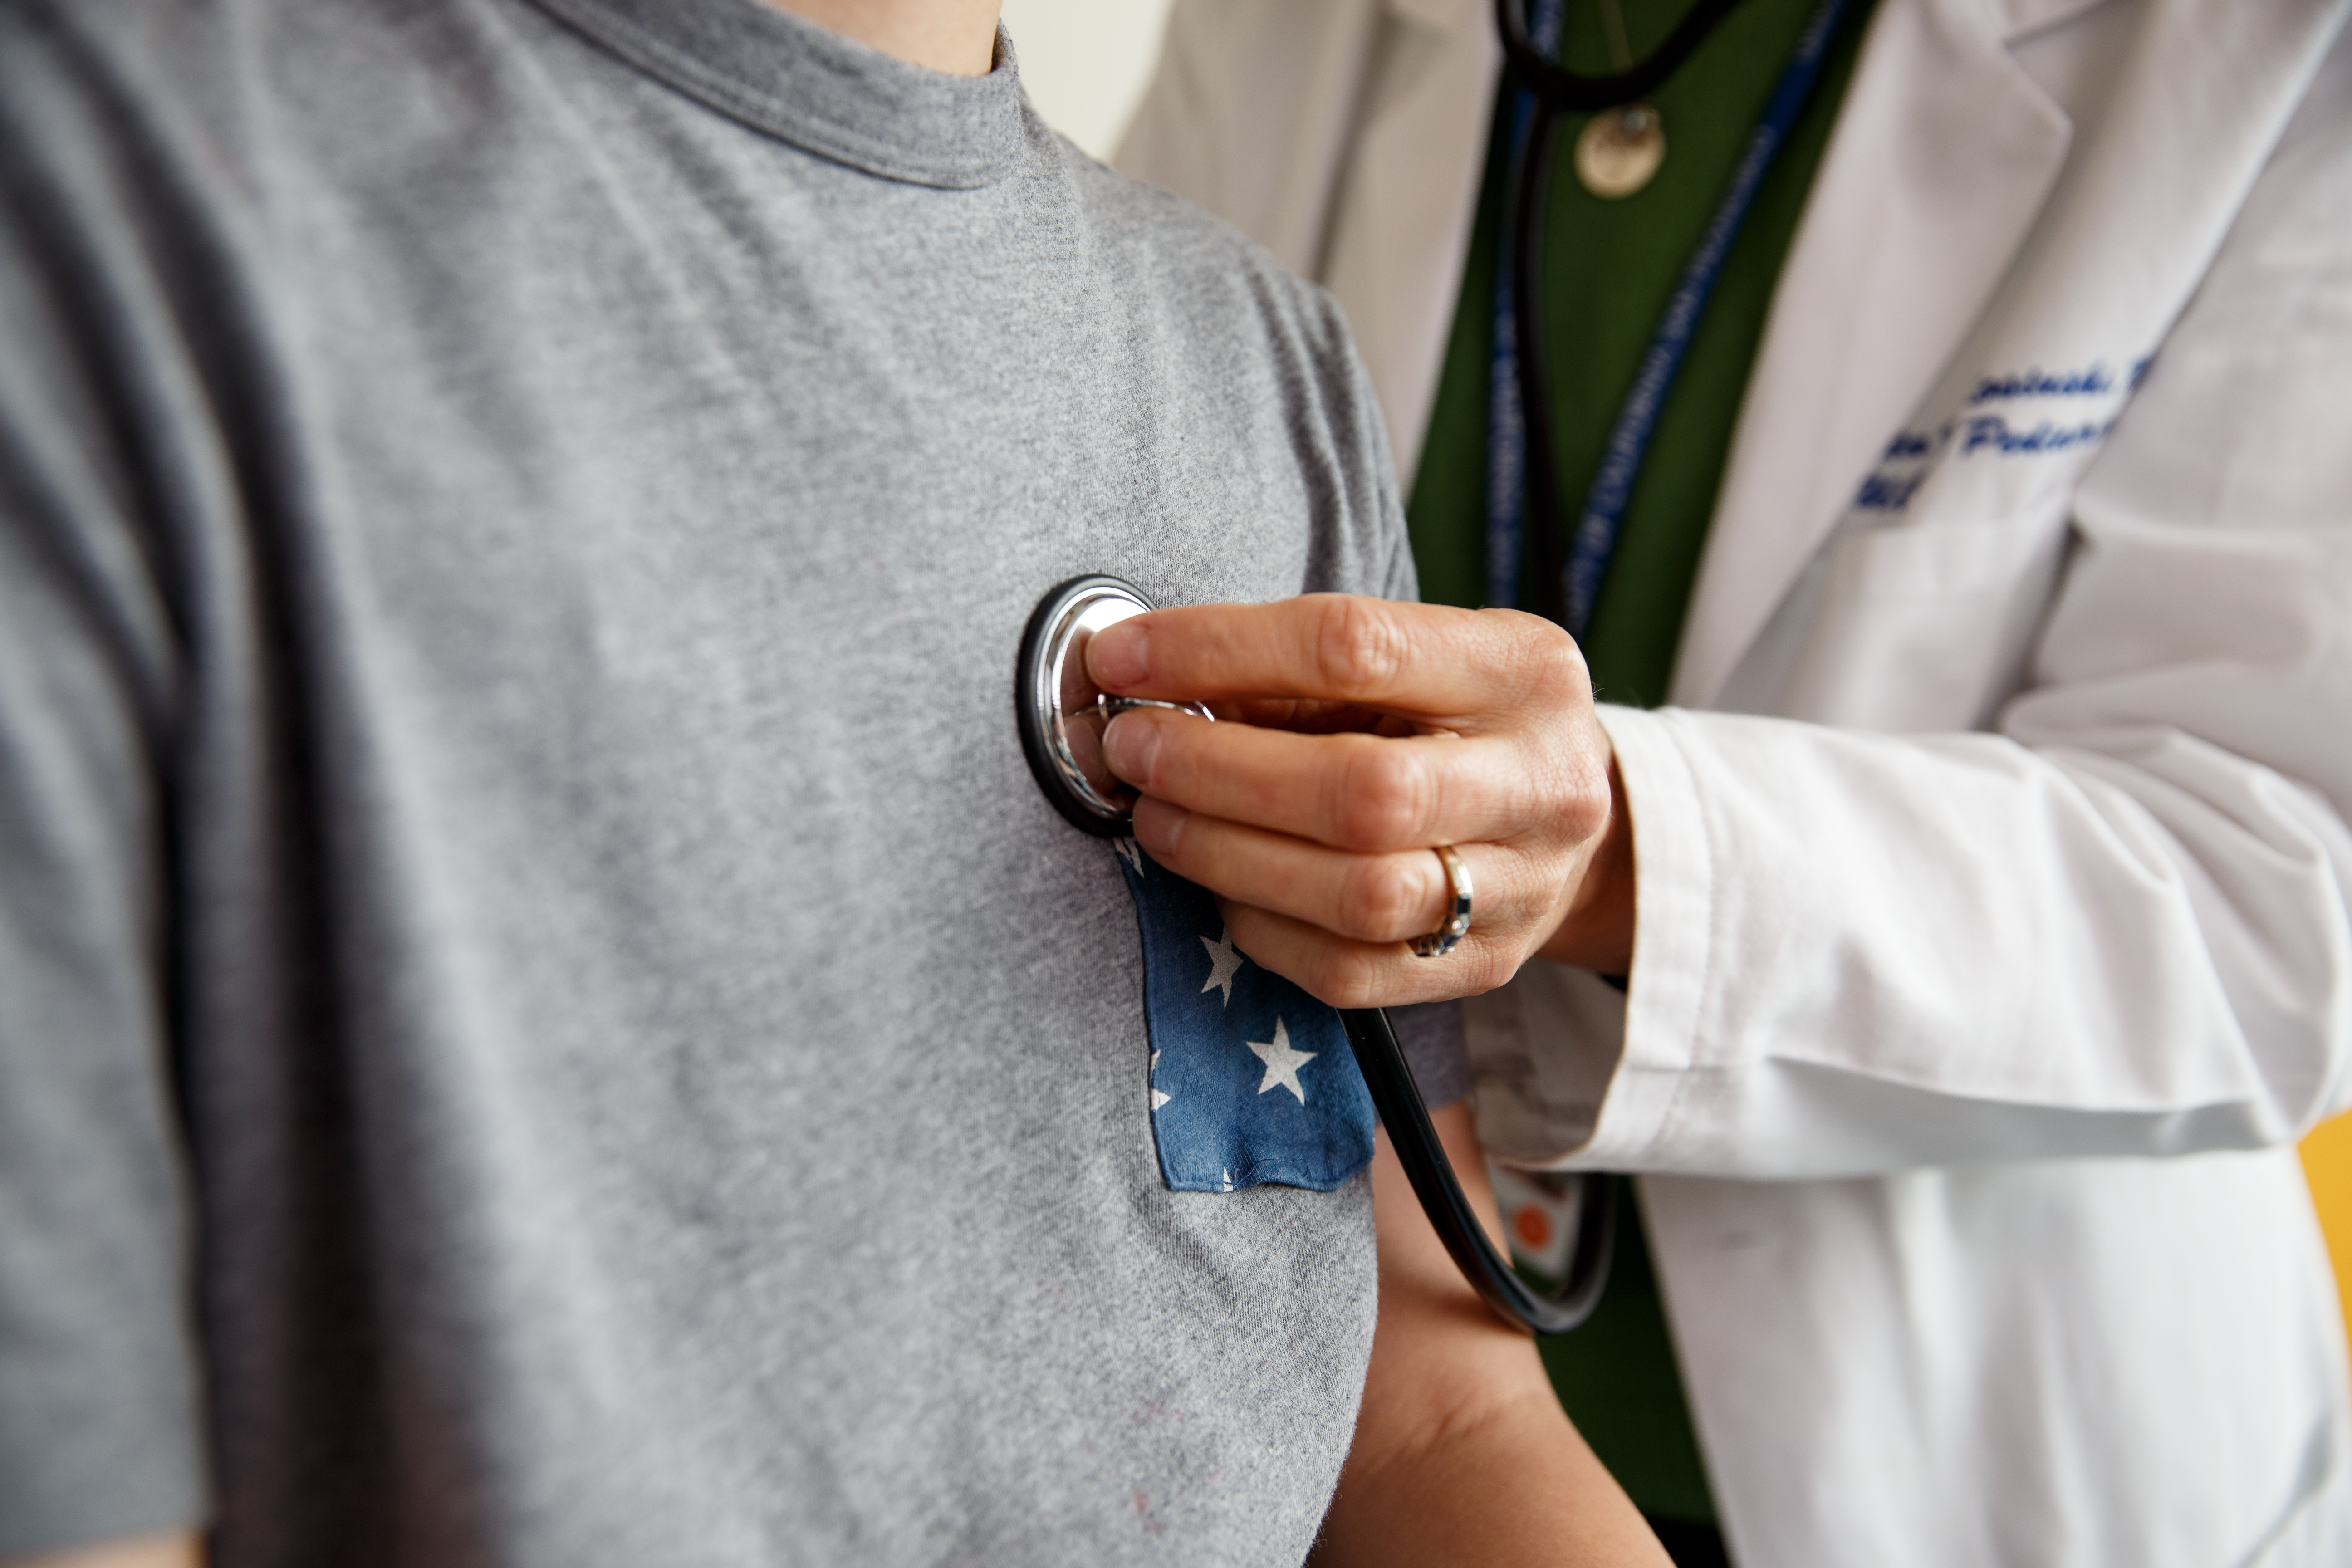 Doctor applying a stethoscope to a patient's chest